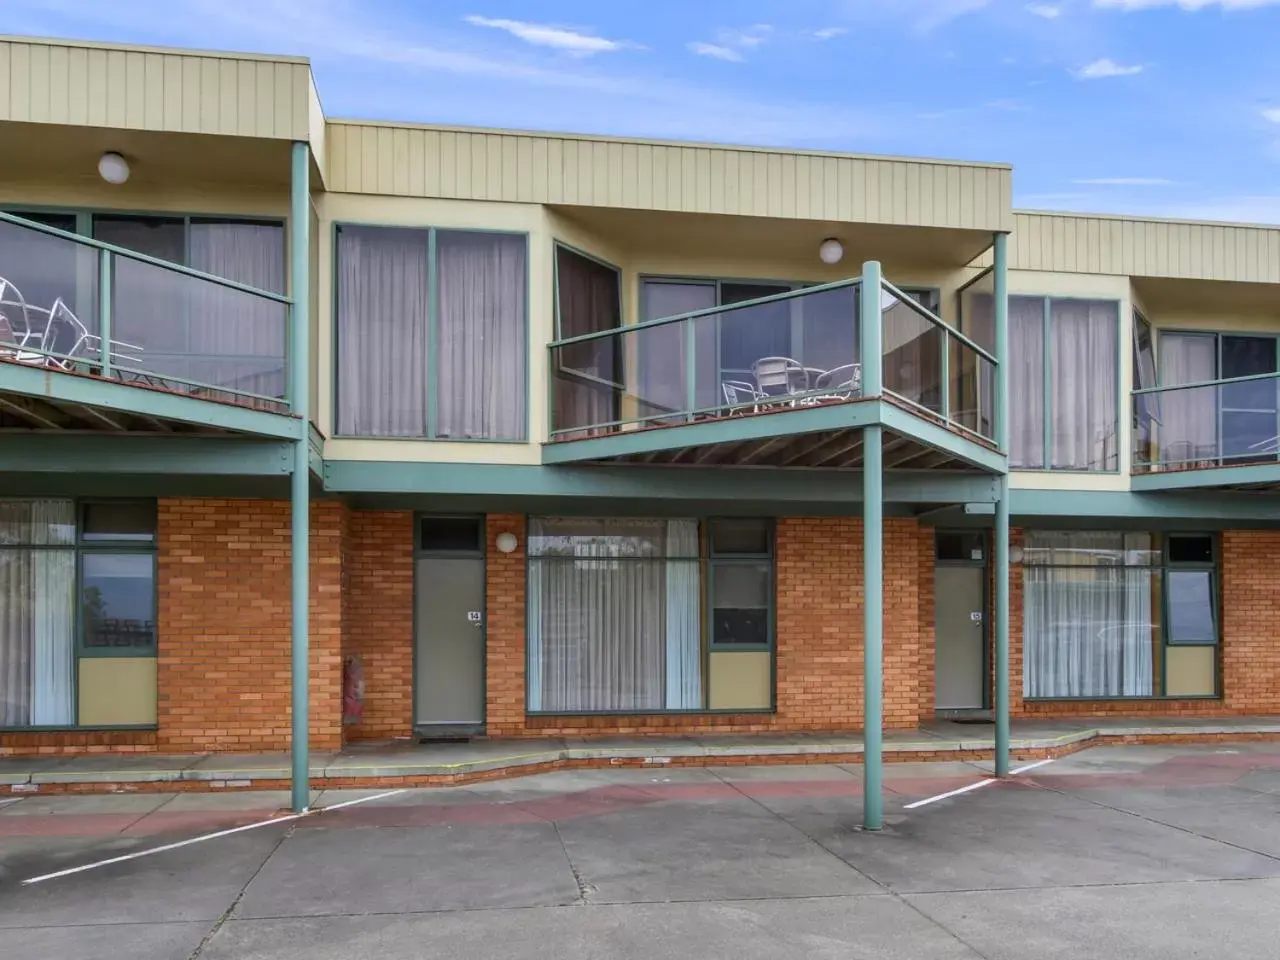 Property Building in Comfort Inn & Suites Lakes Entrance